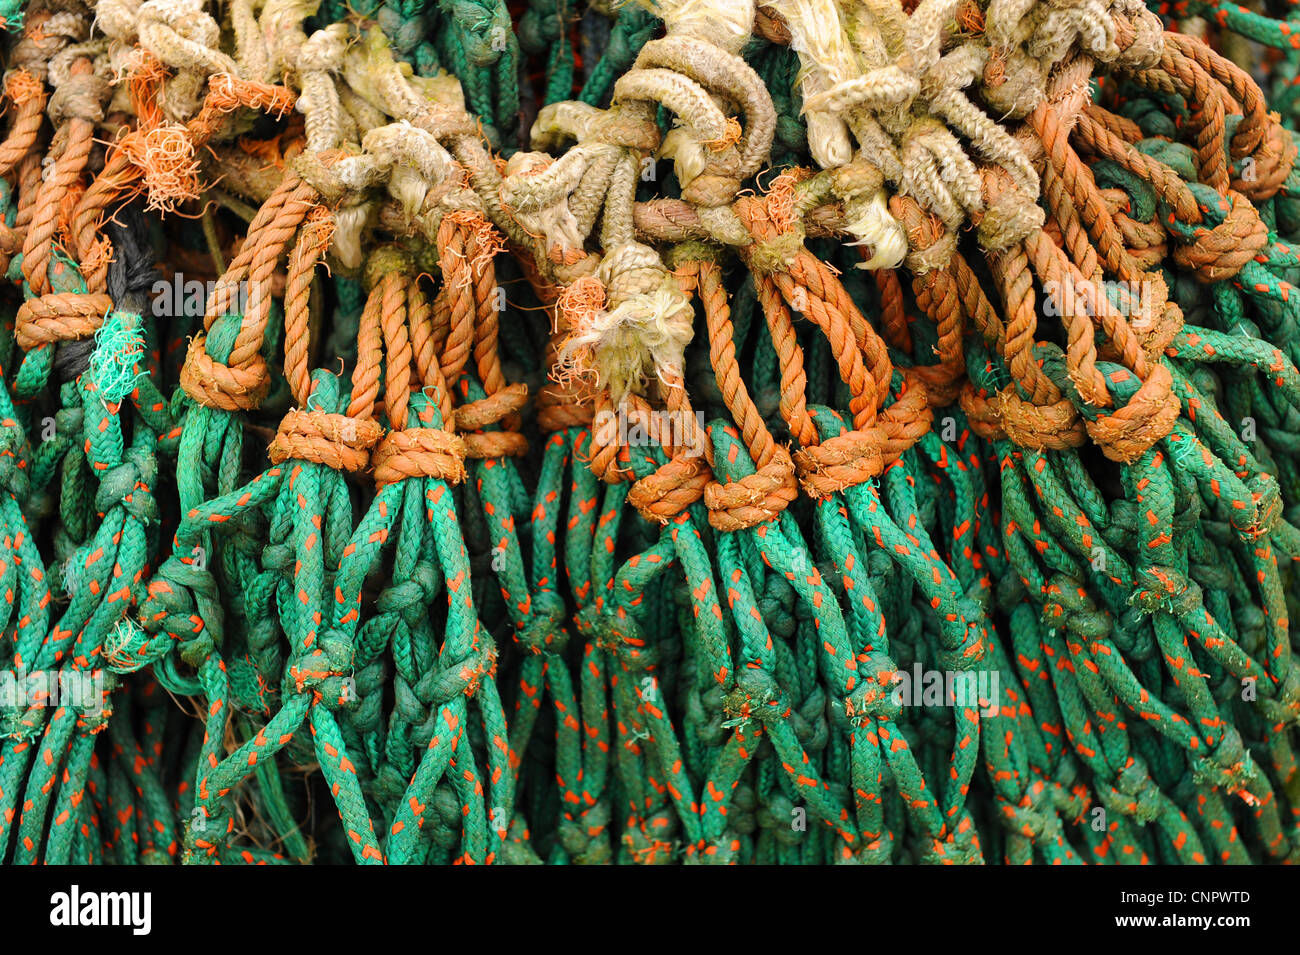 knots and ties on scallop boat fishing nets Stock Photo